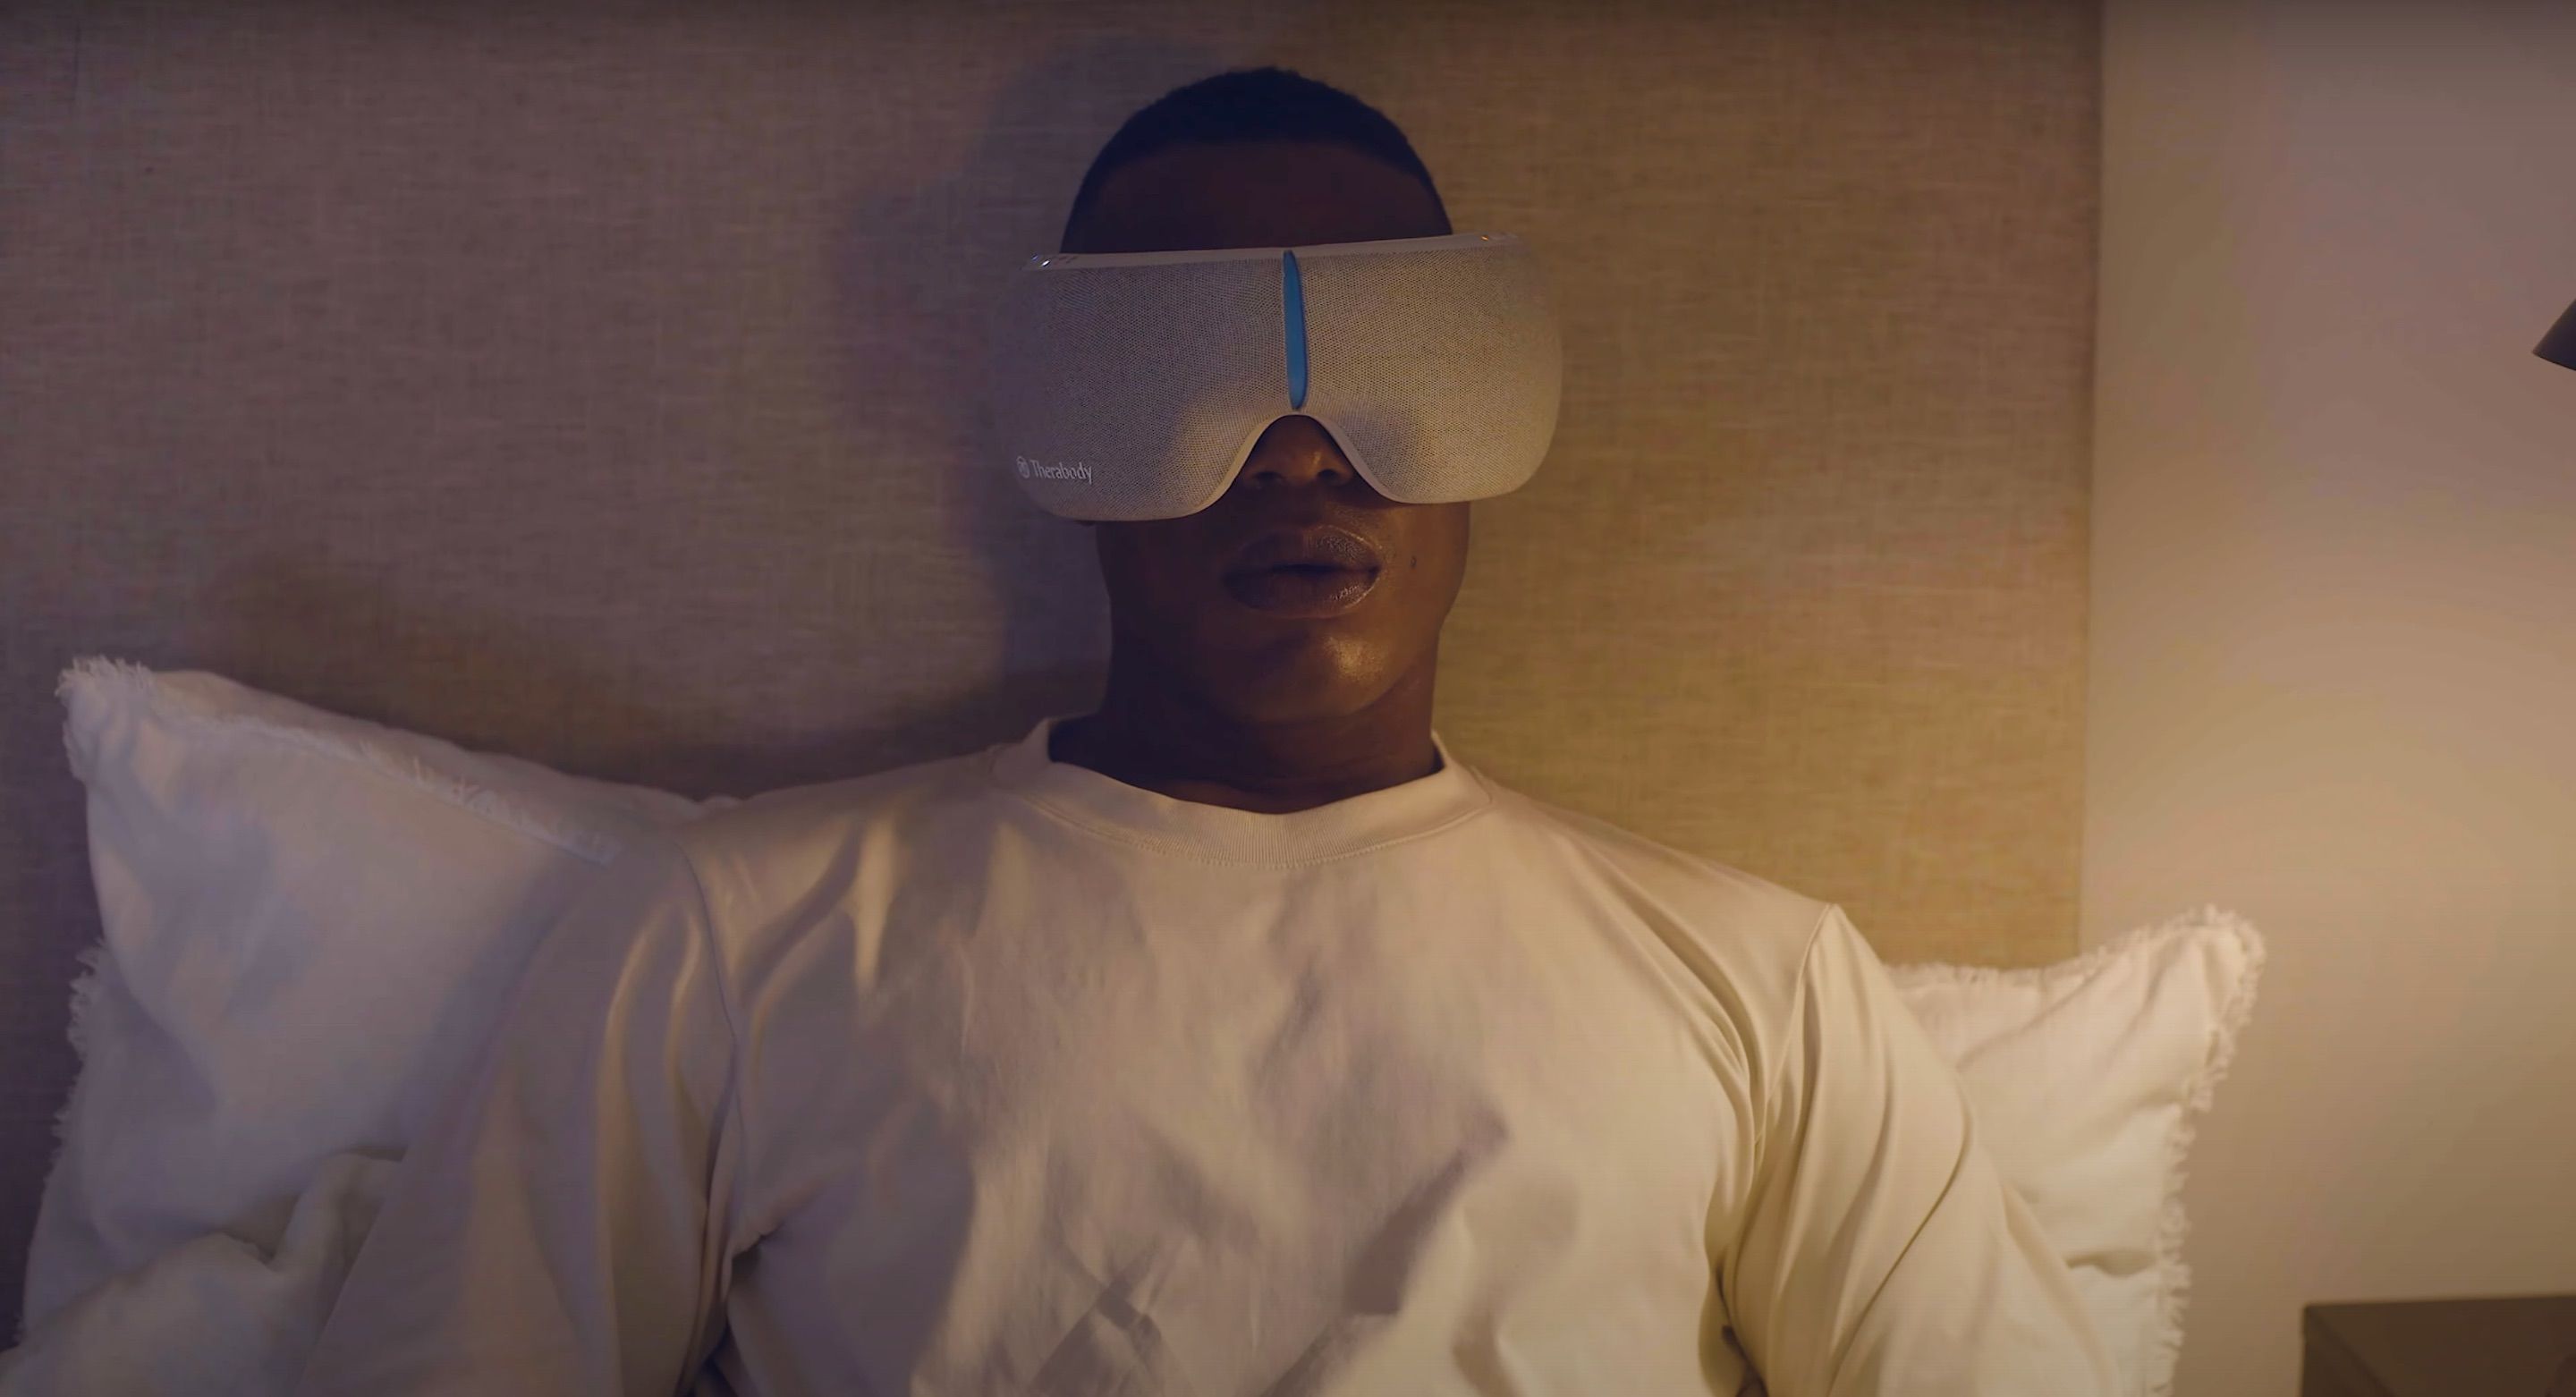 therabody smartgoggles man wearing in bed